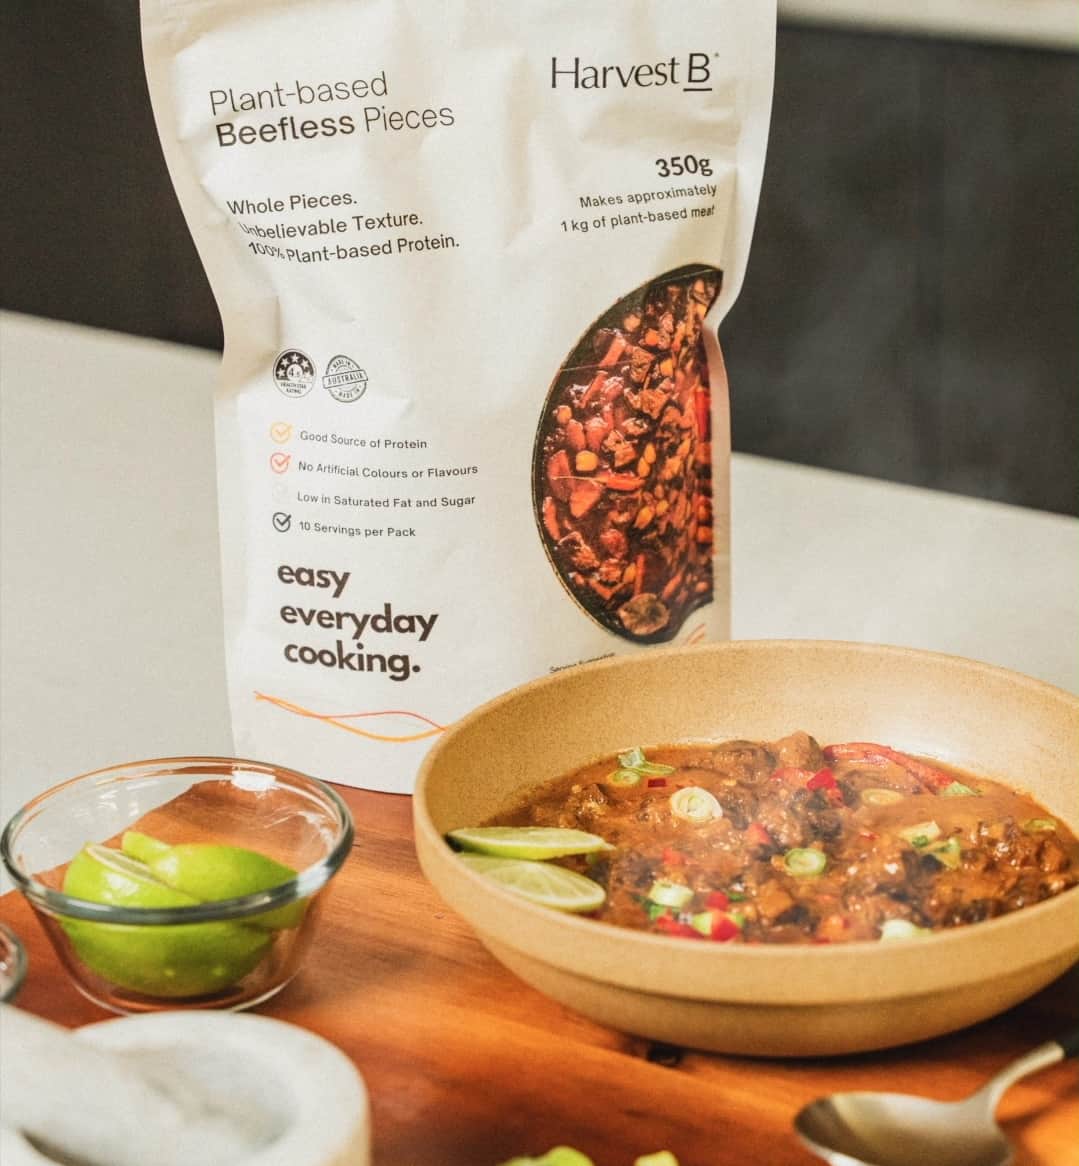 Harvest B launches at HealthyLive